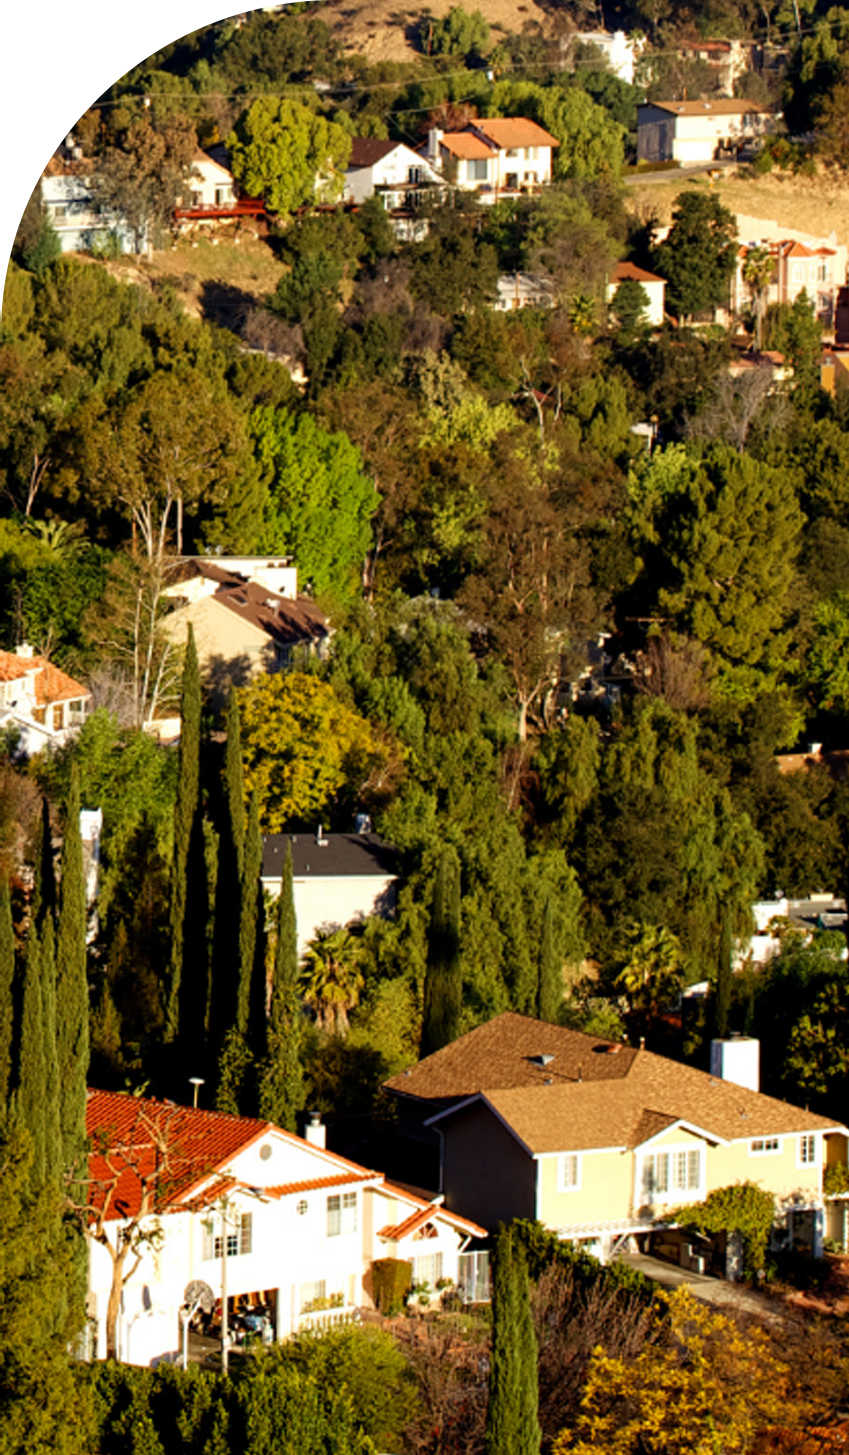 A view of Woodland Hills Houses during sunset